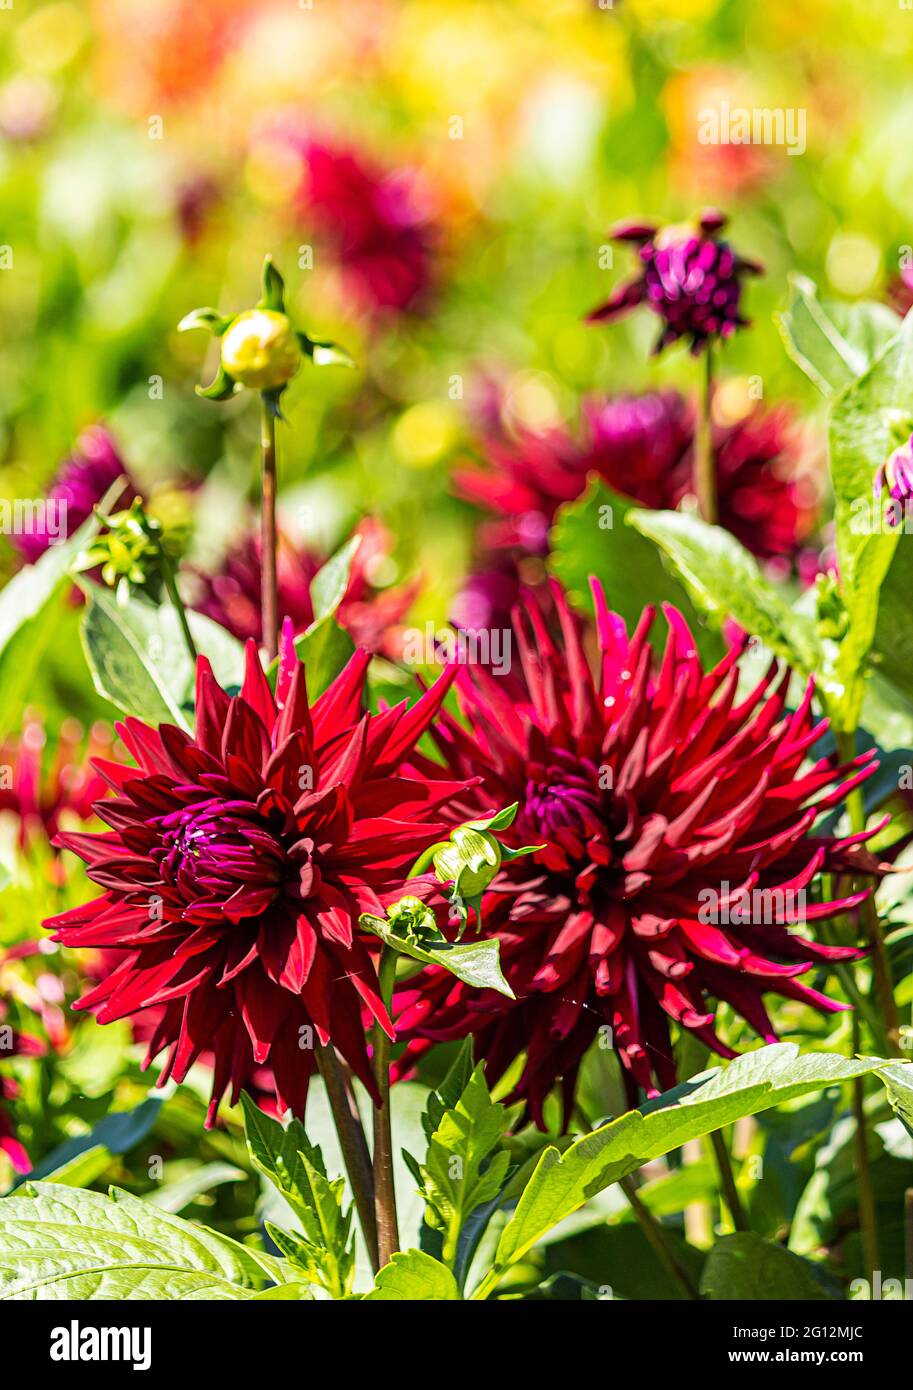 Purple and red Dahlia plants in a garden Stock Photo